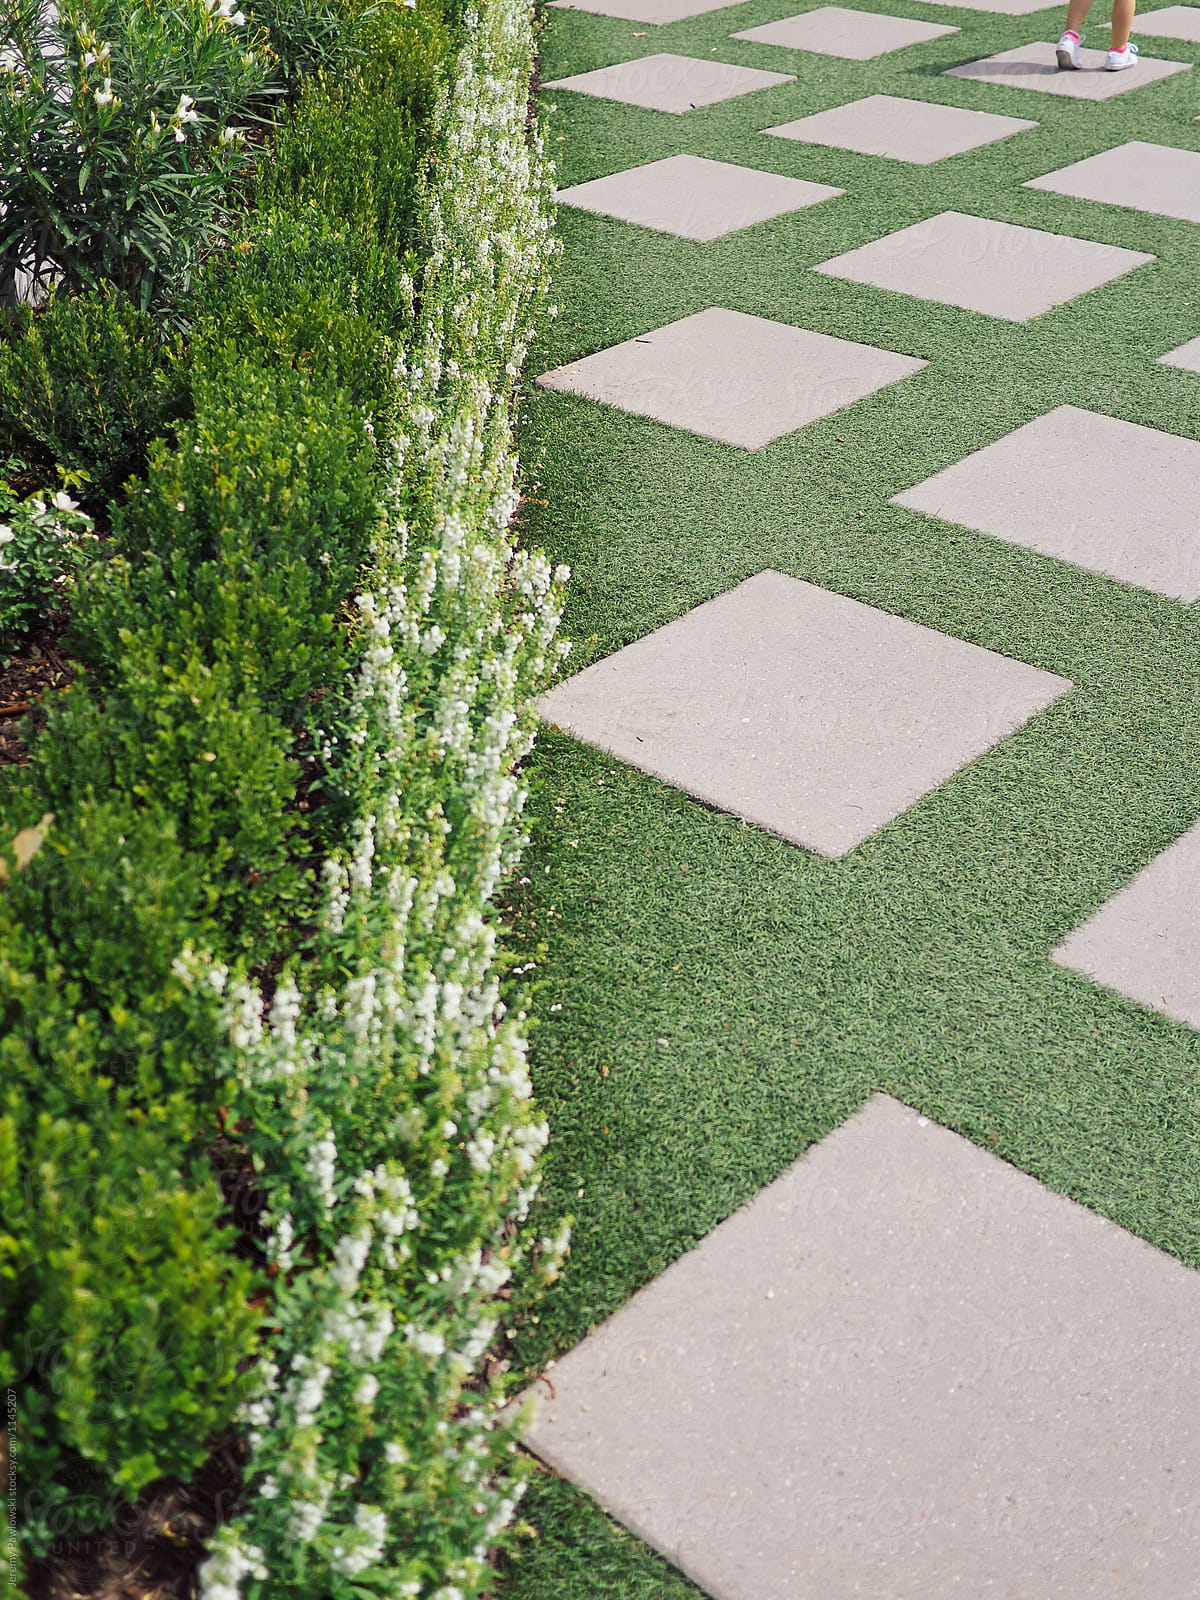 Concrete tiles and fake grass used in landscaping